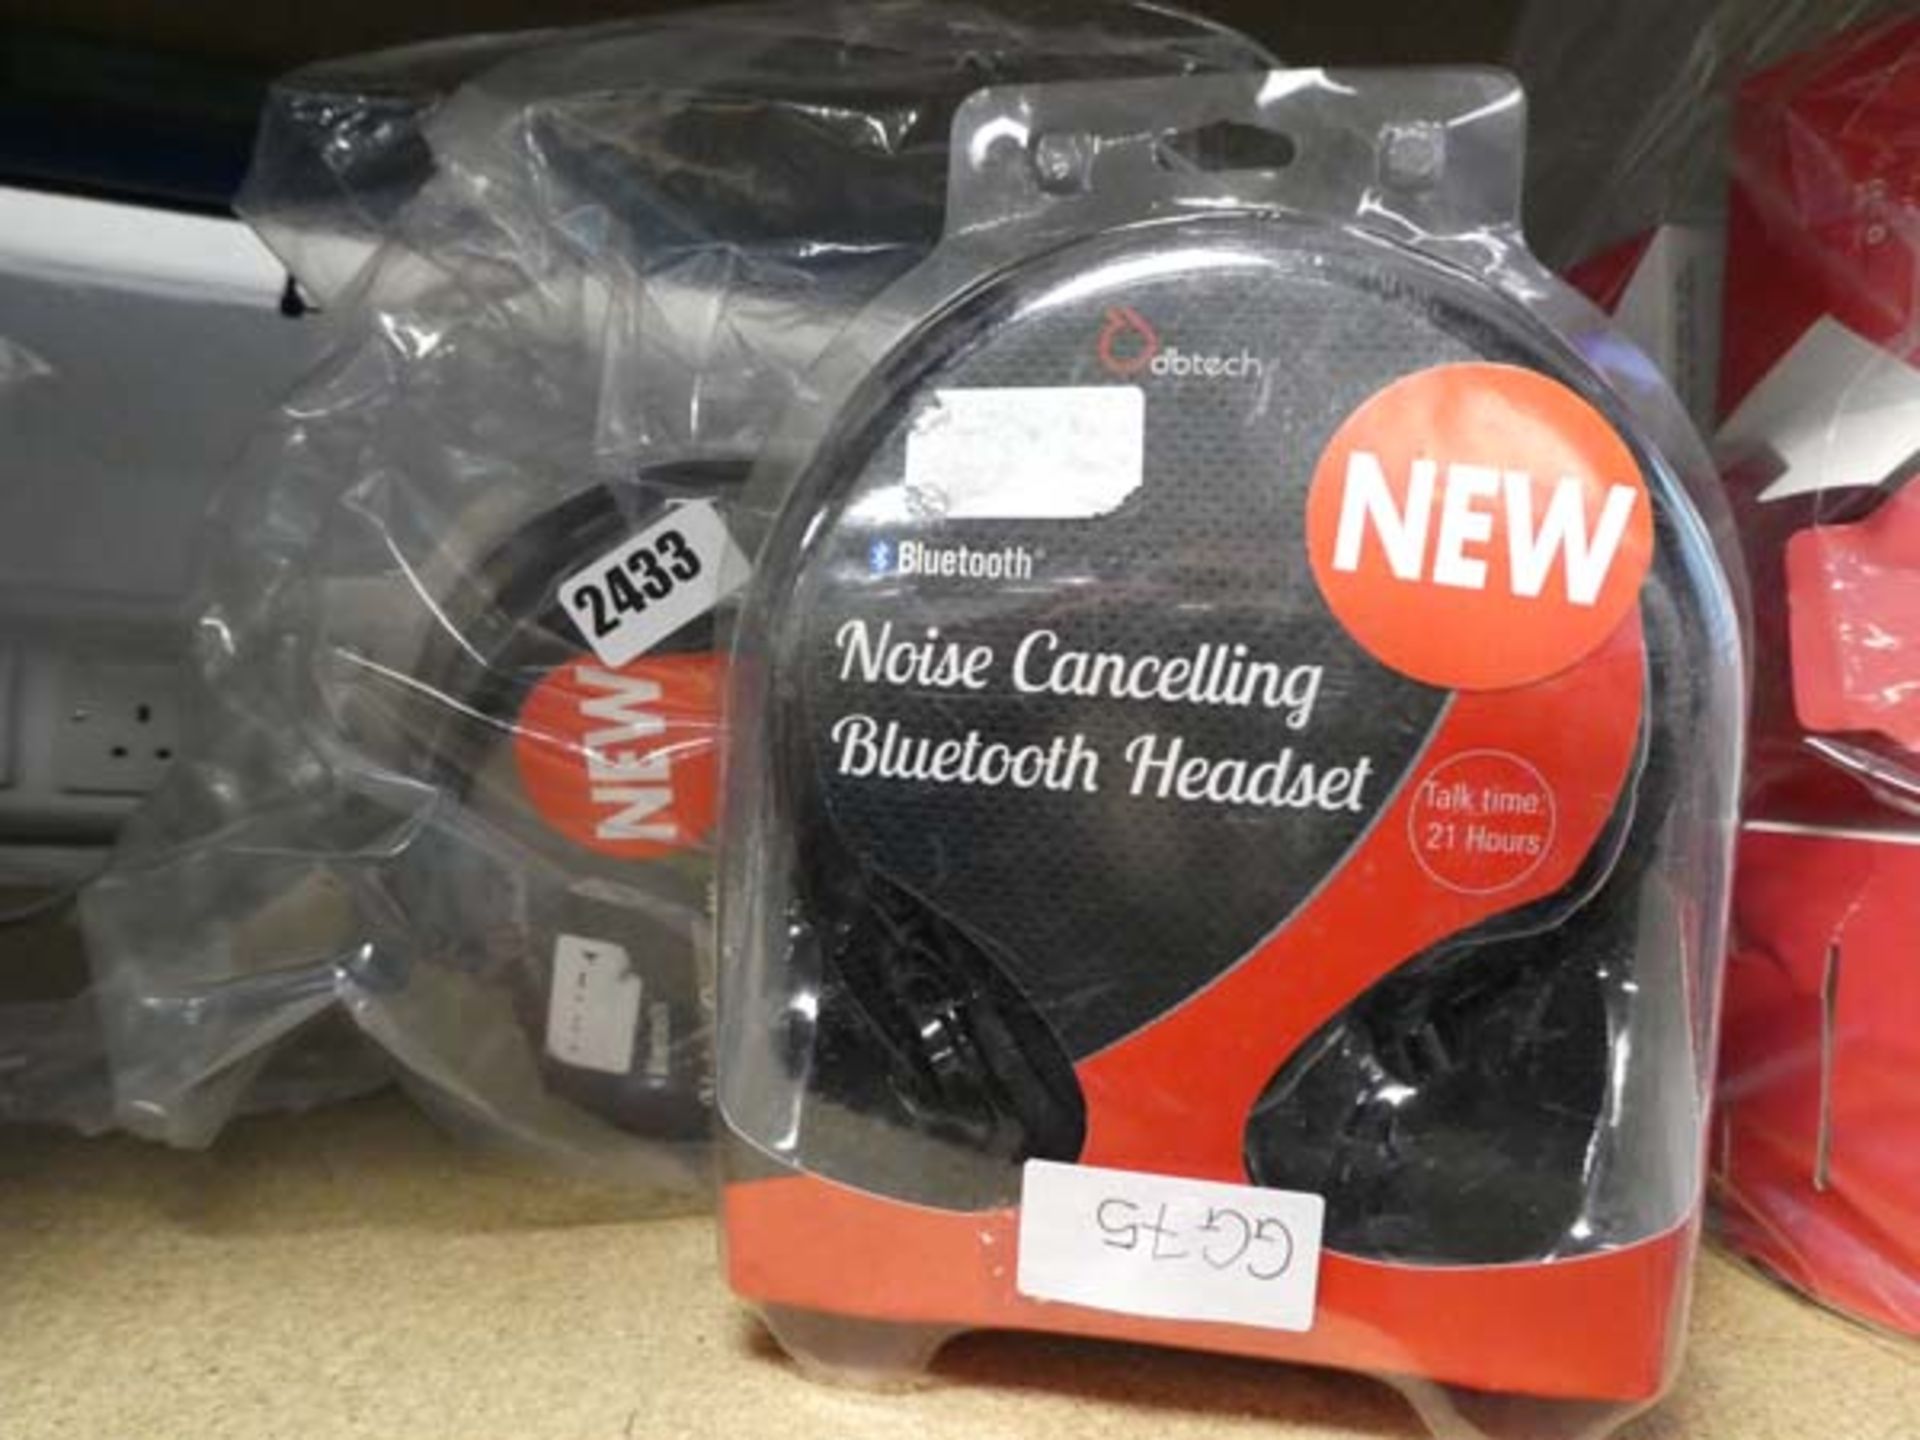 3 DBTech bluetooth noise cancelling headphones in blister packs